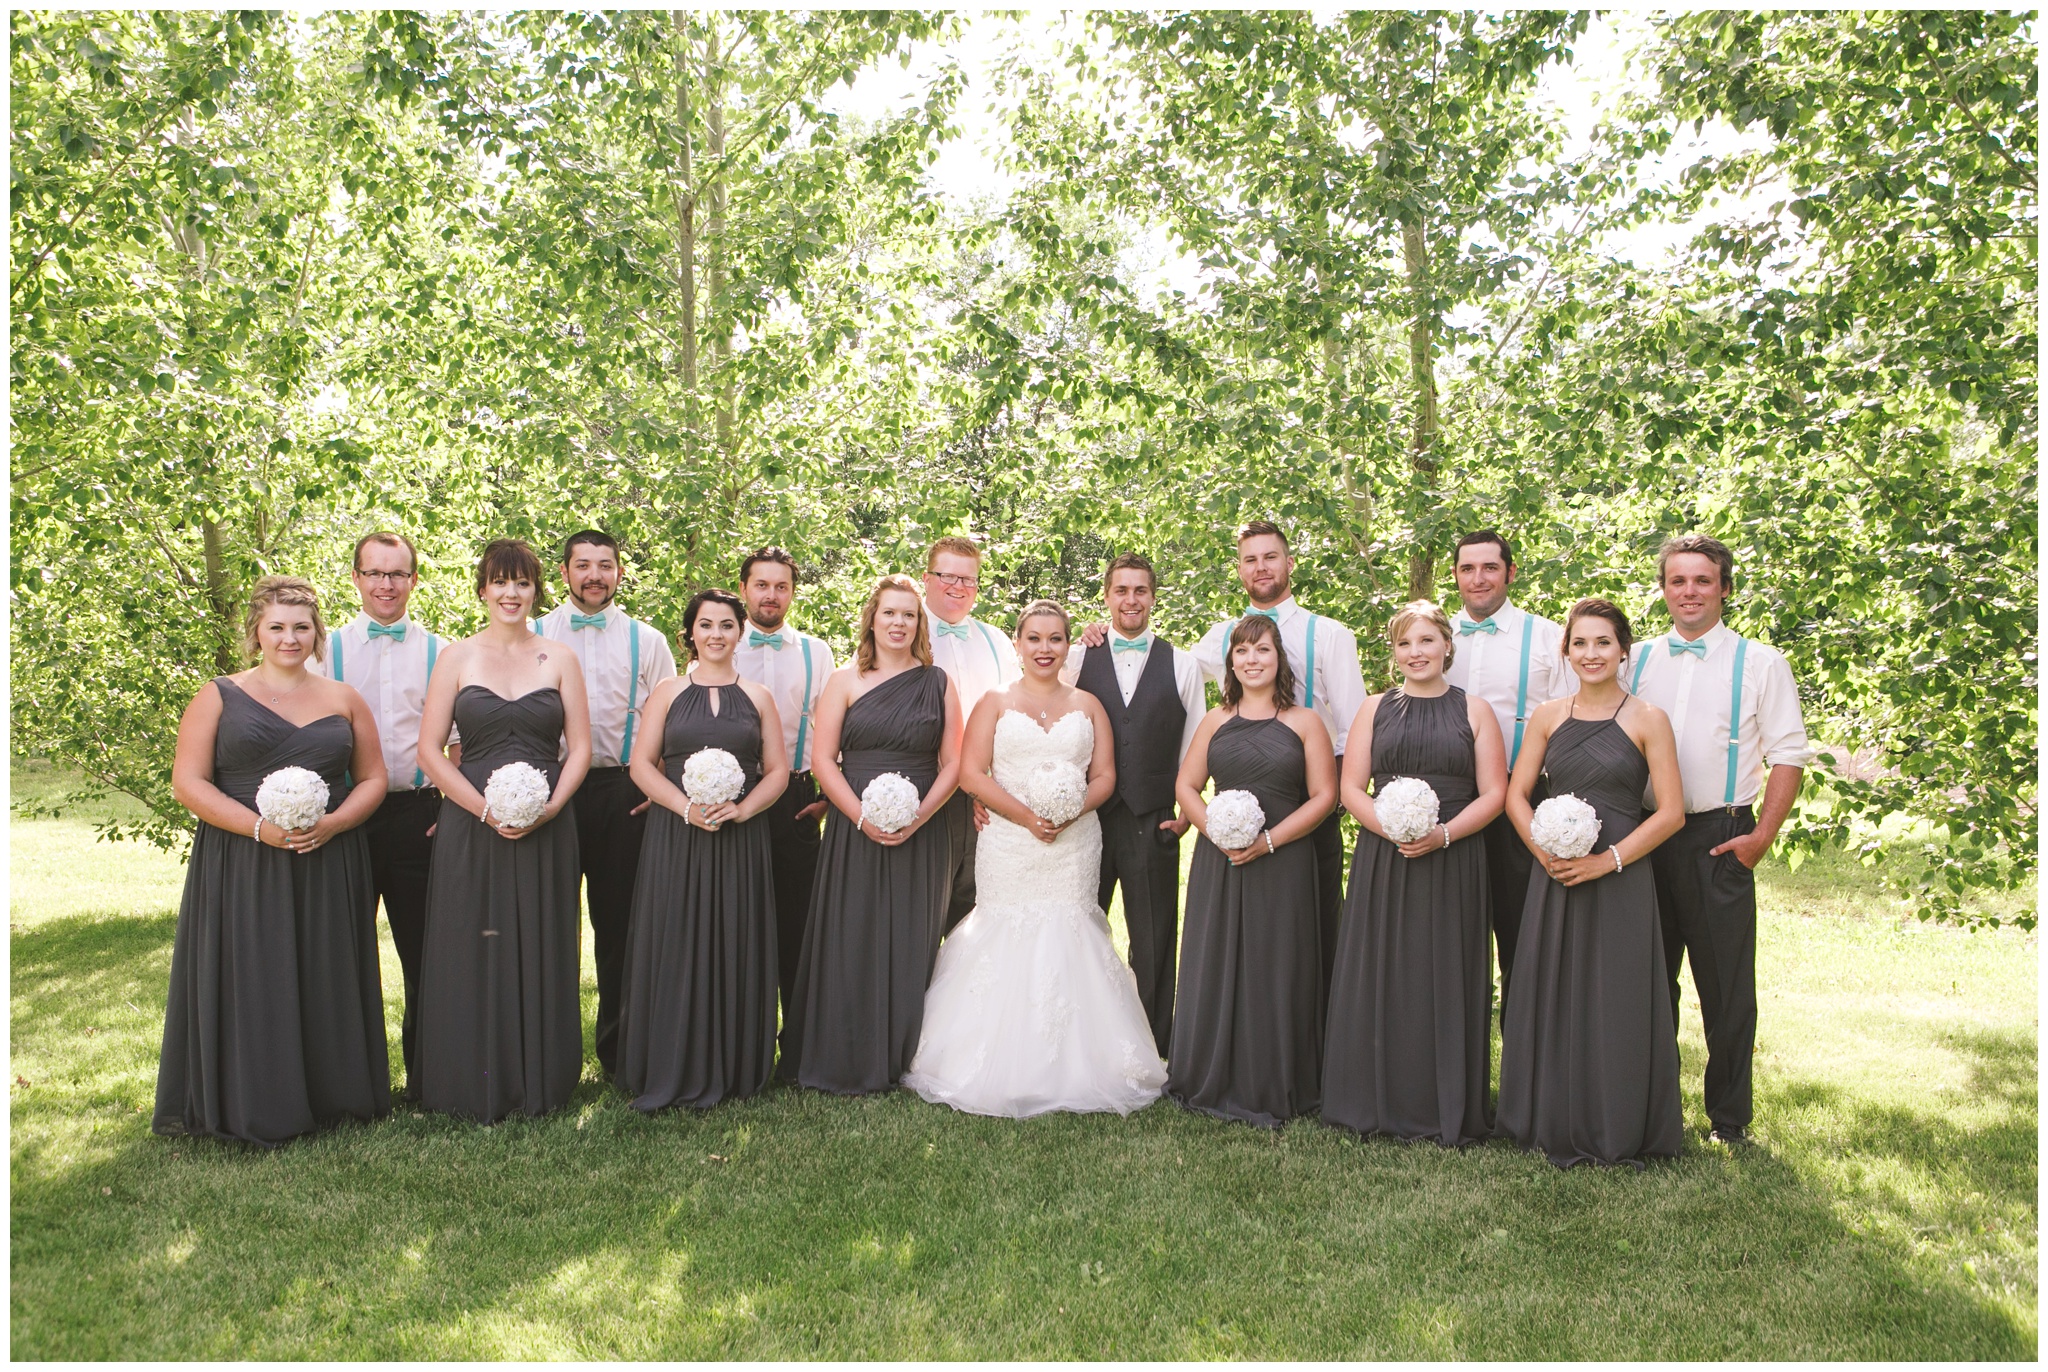 How to pose a bridal party photo